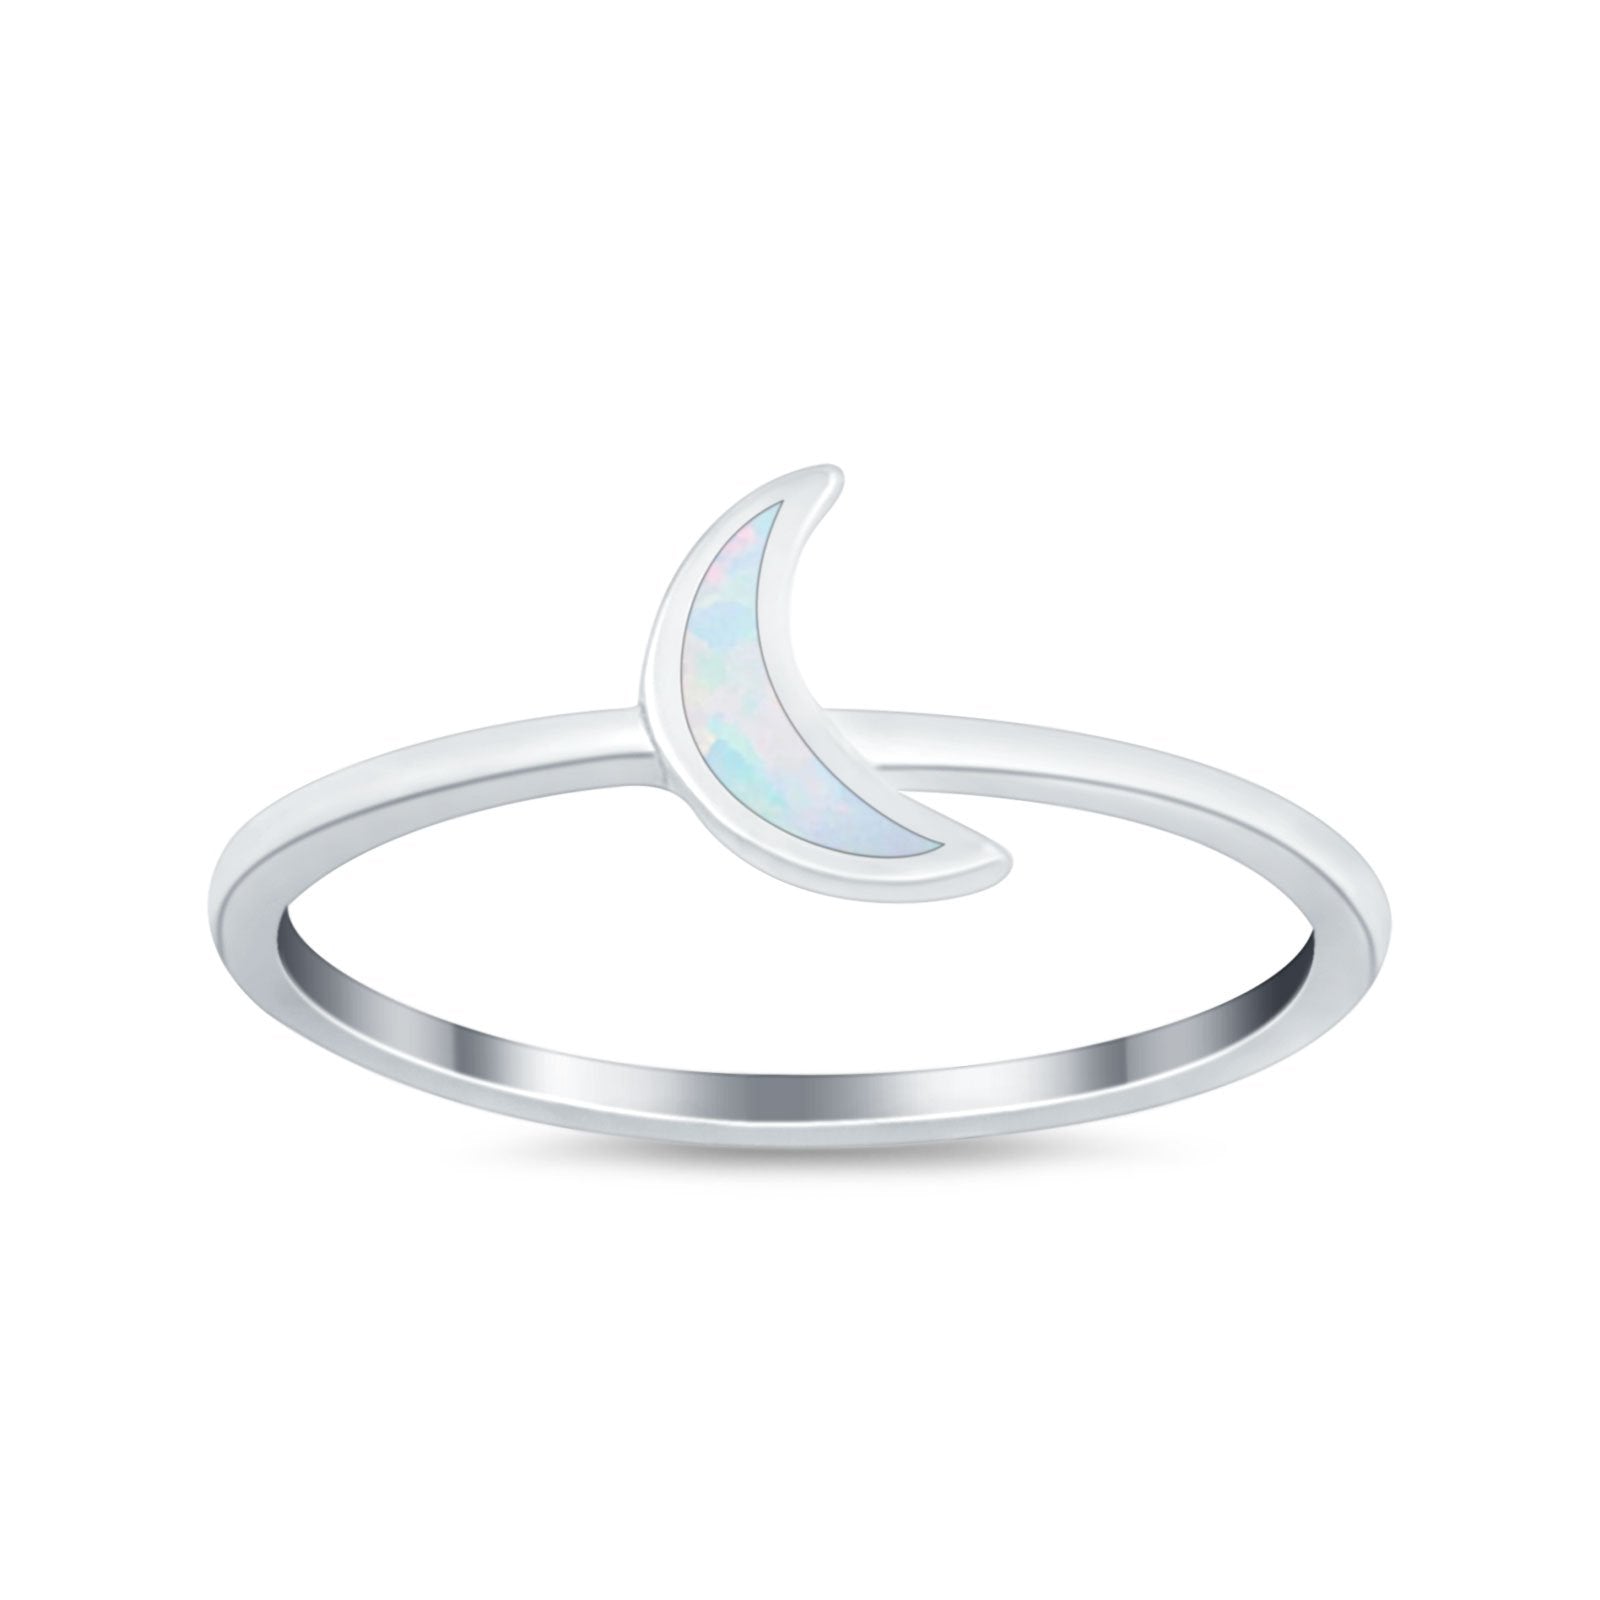 Moon Band Crescent Ring Lab Created White Opal 925 Sterling Silver